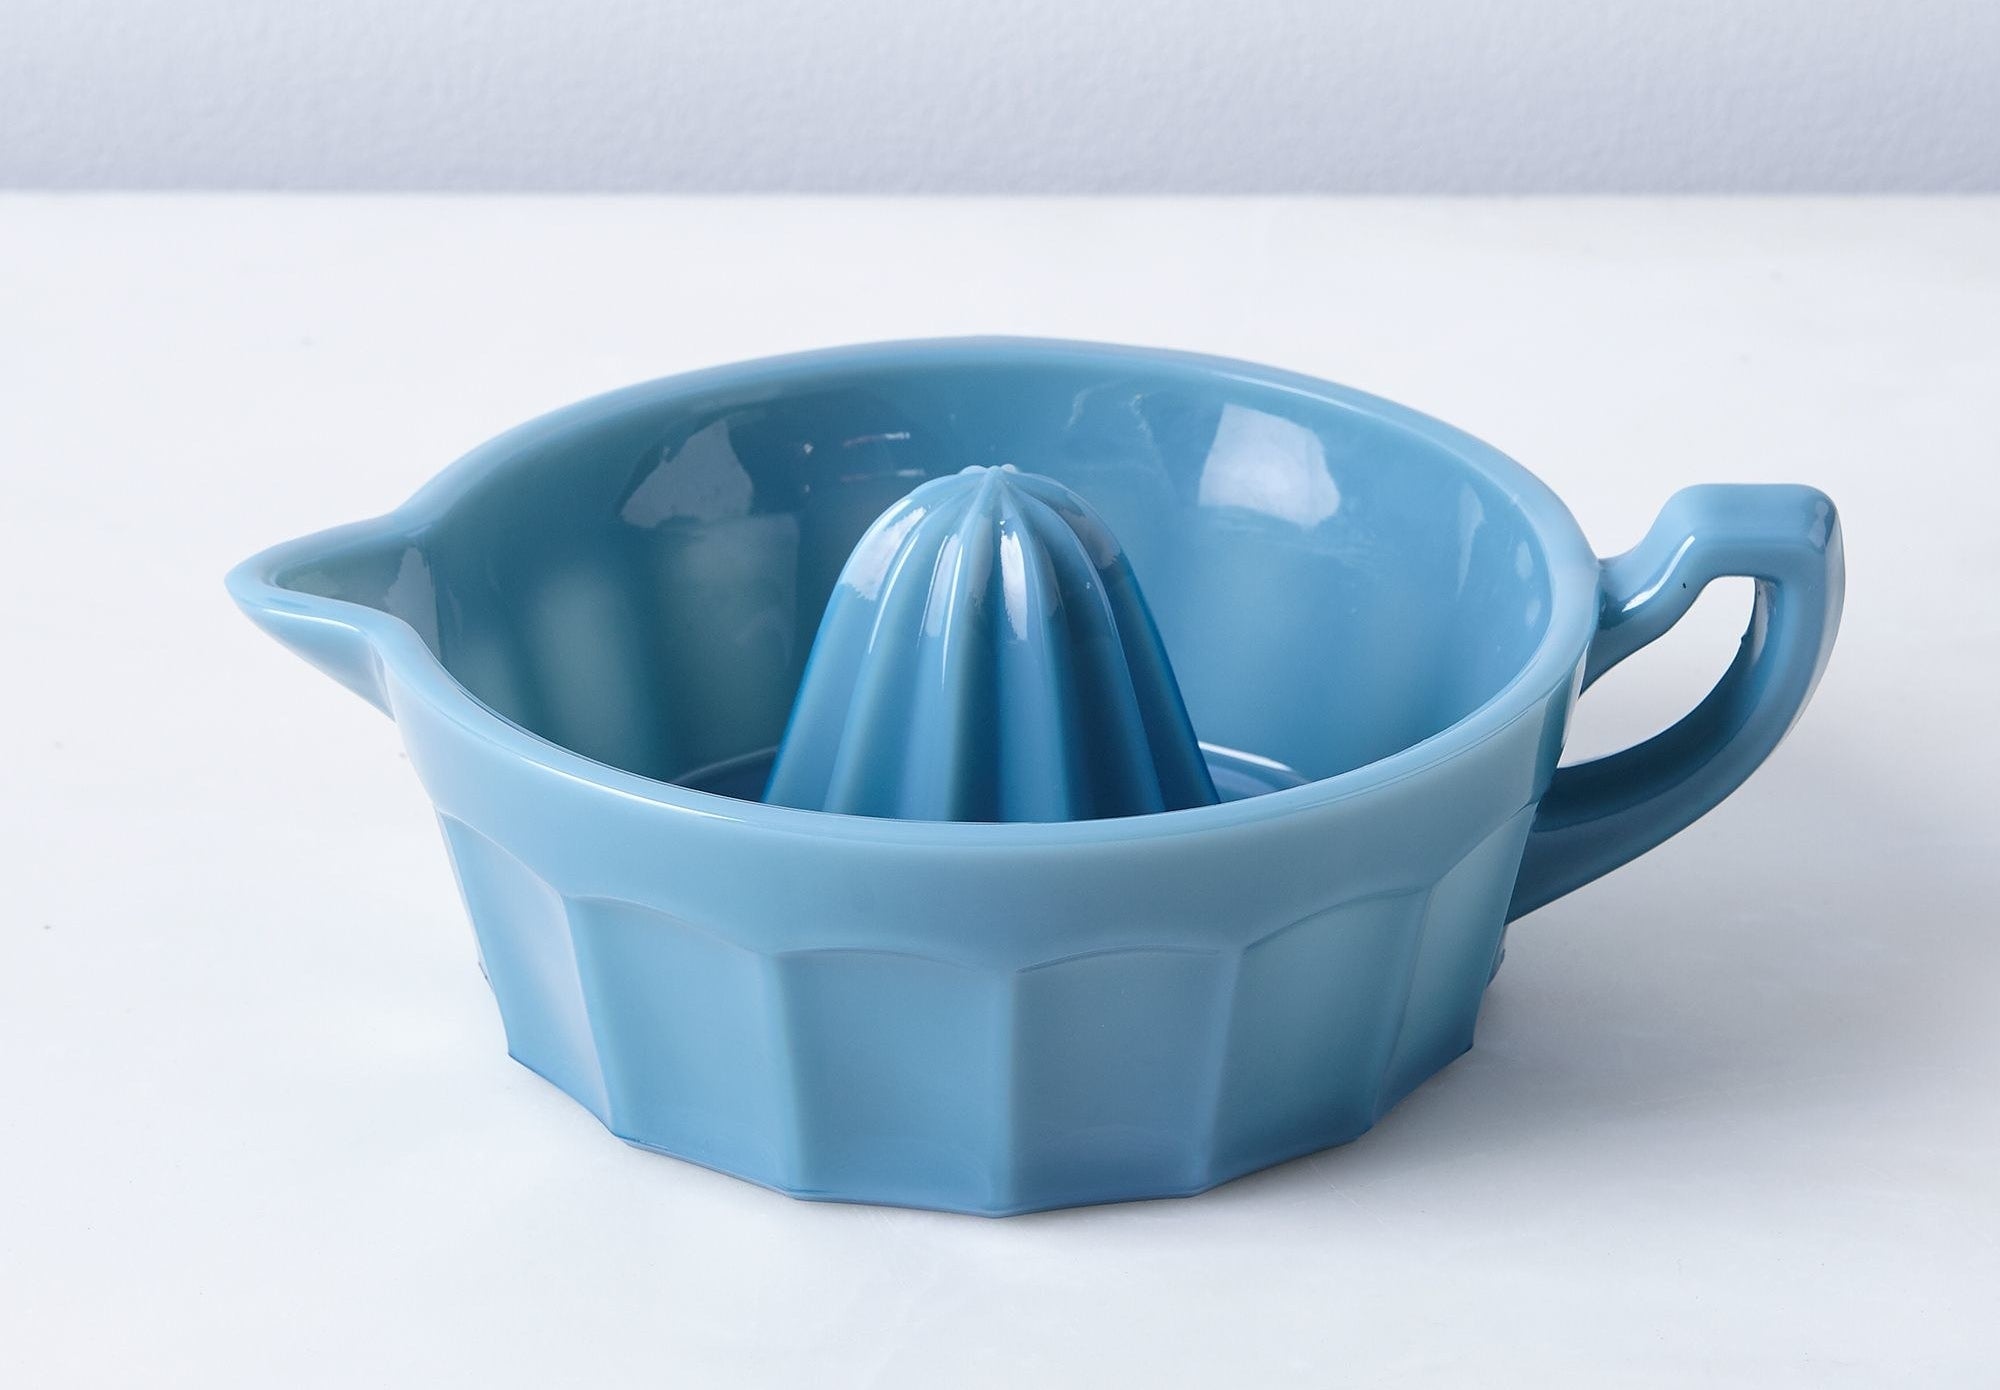 The juicer with a handle and spout in blue